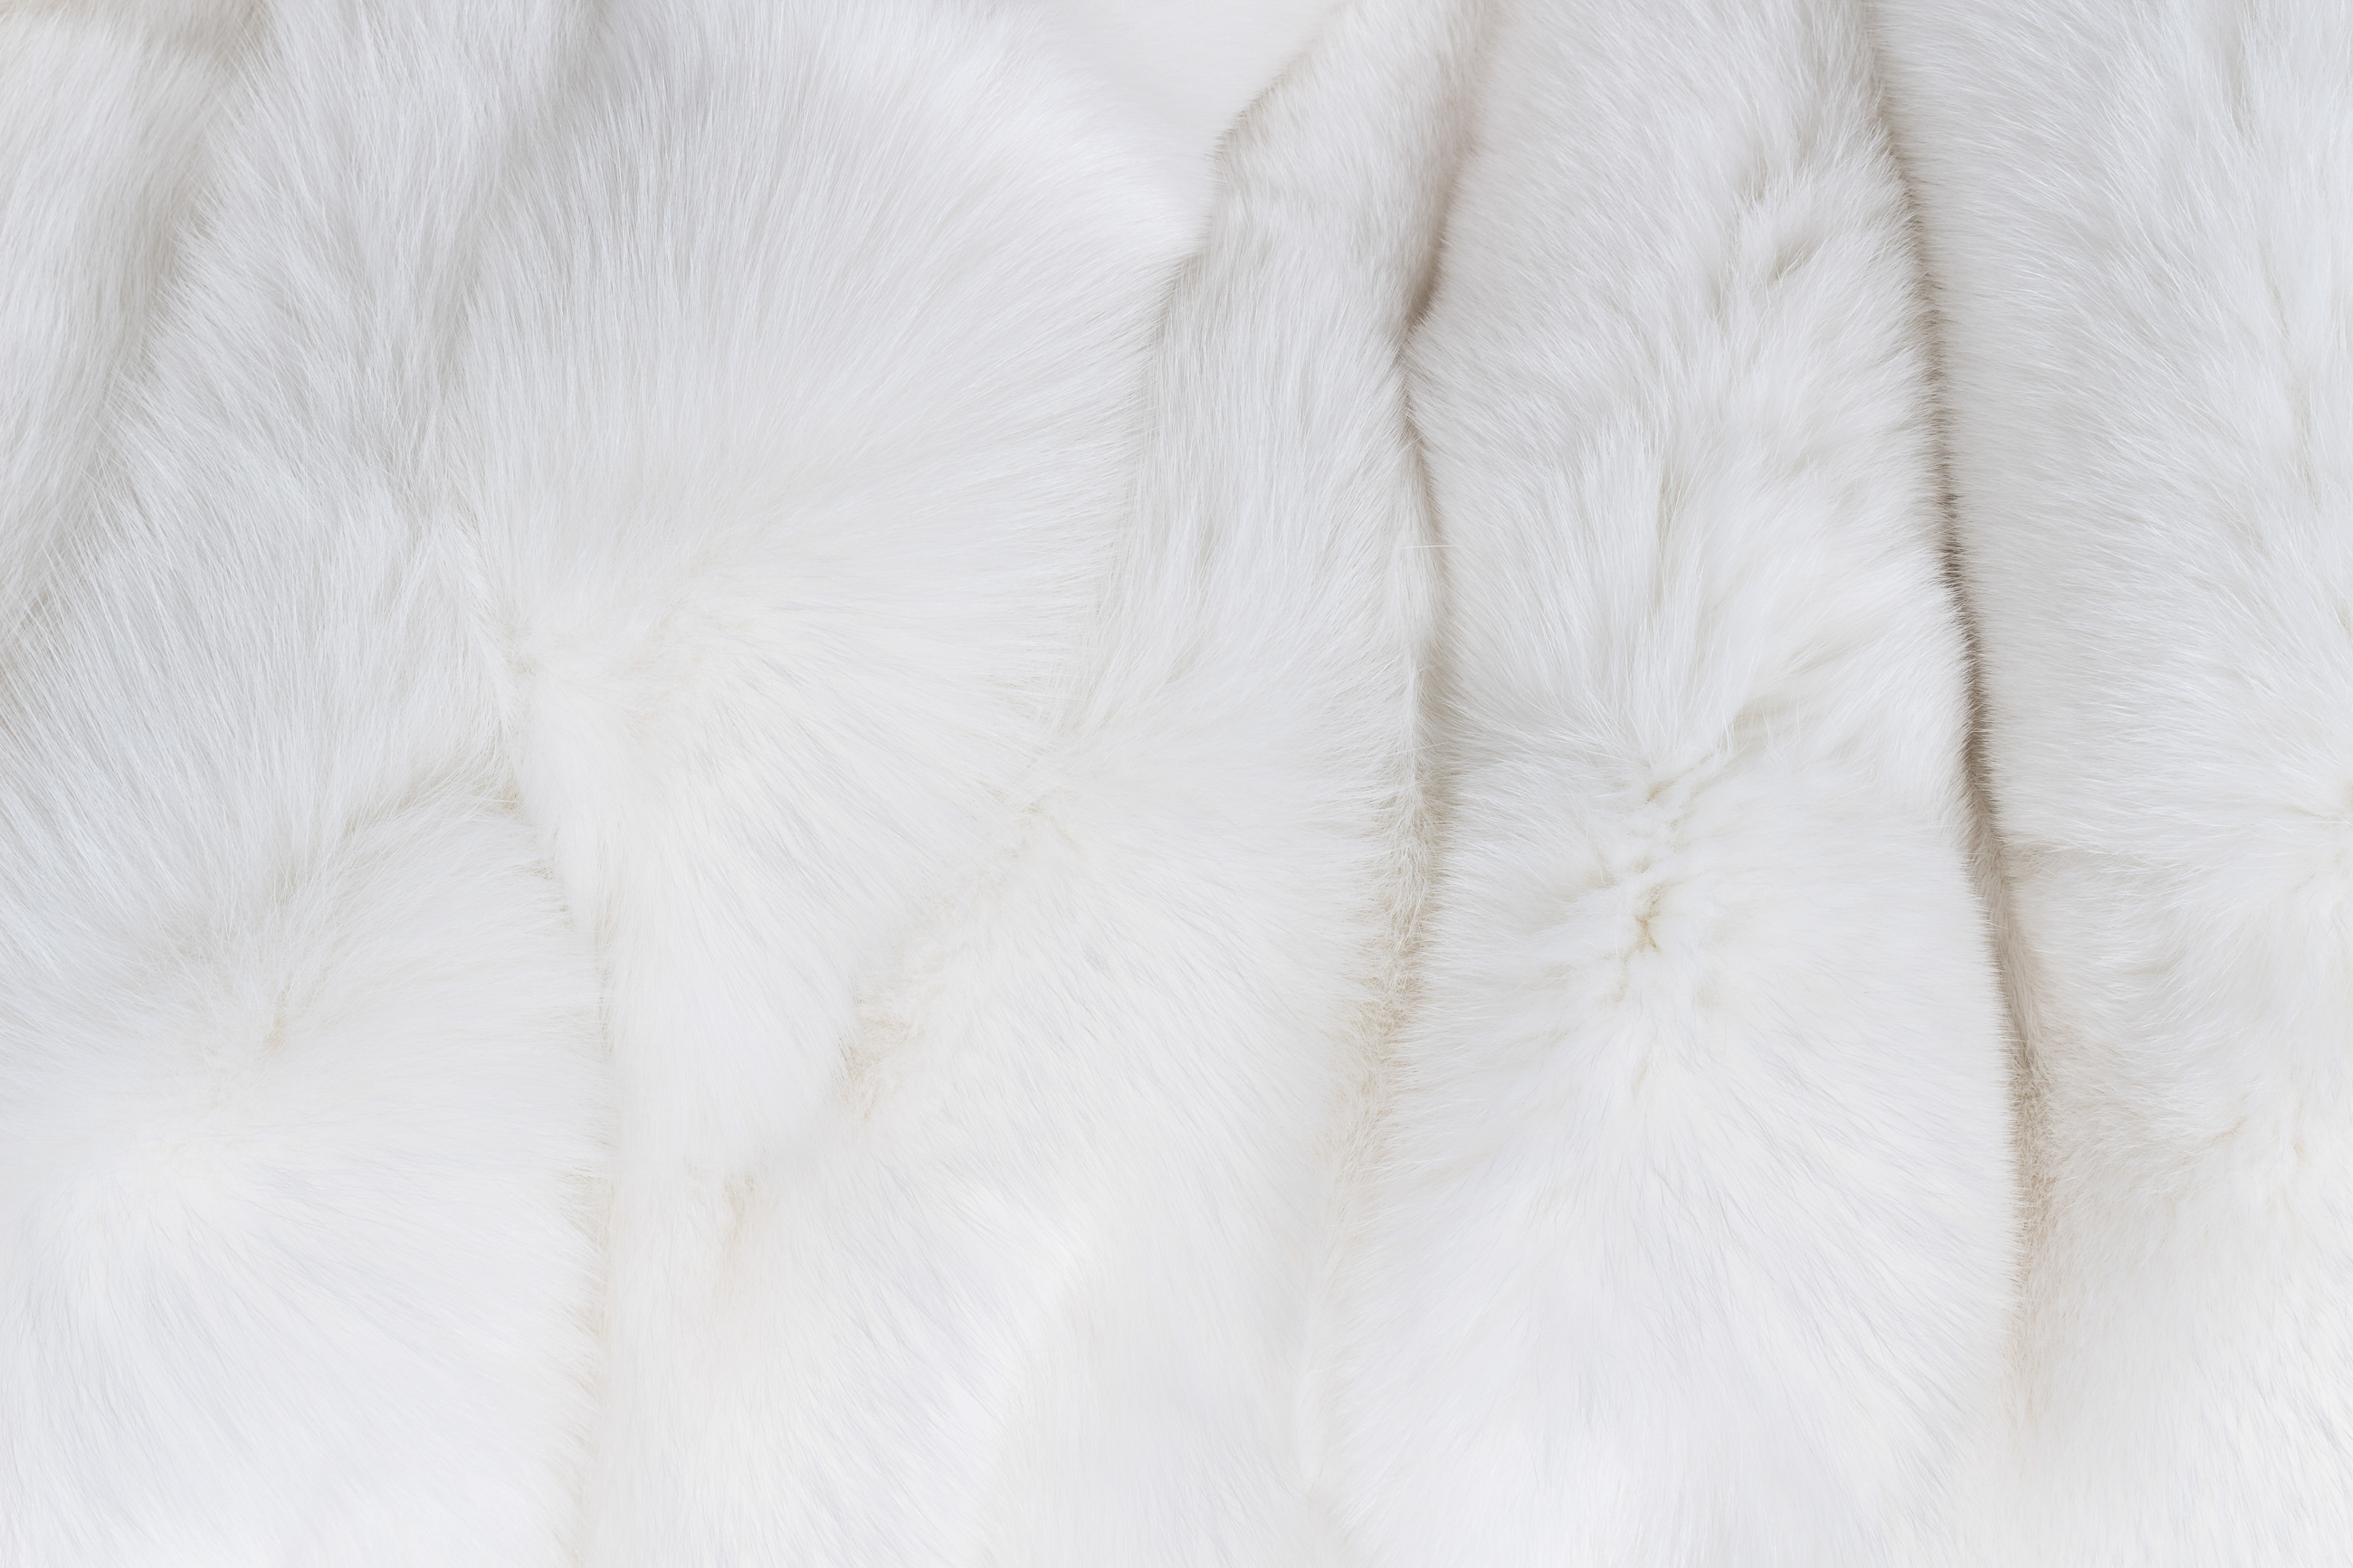 SAGA Shadow fox fur blanket white - with cashmere lining in ivory